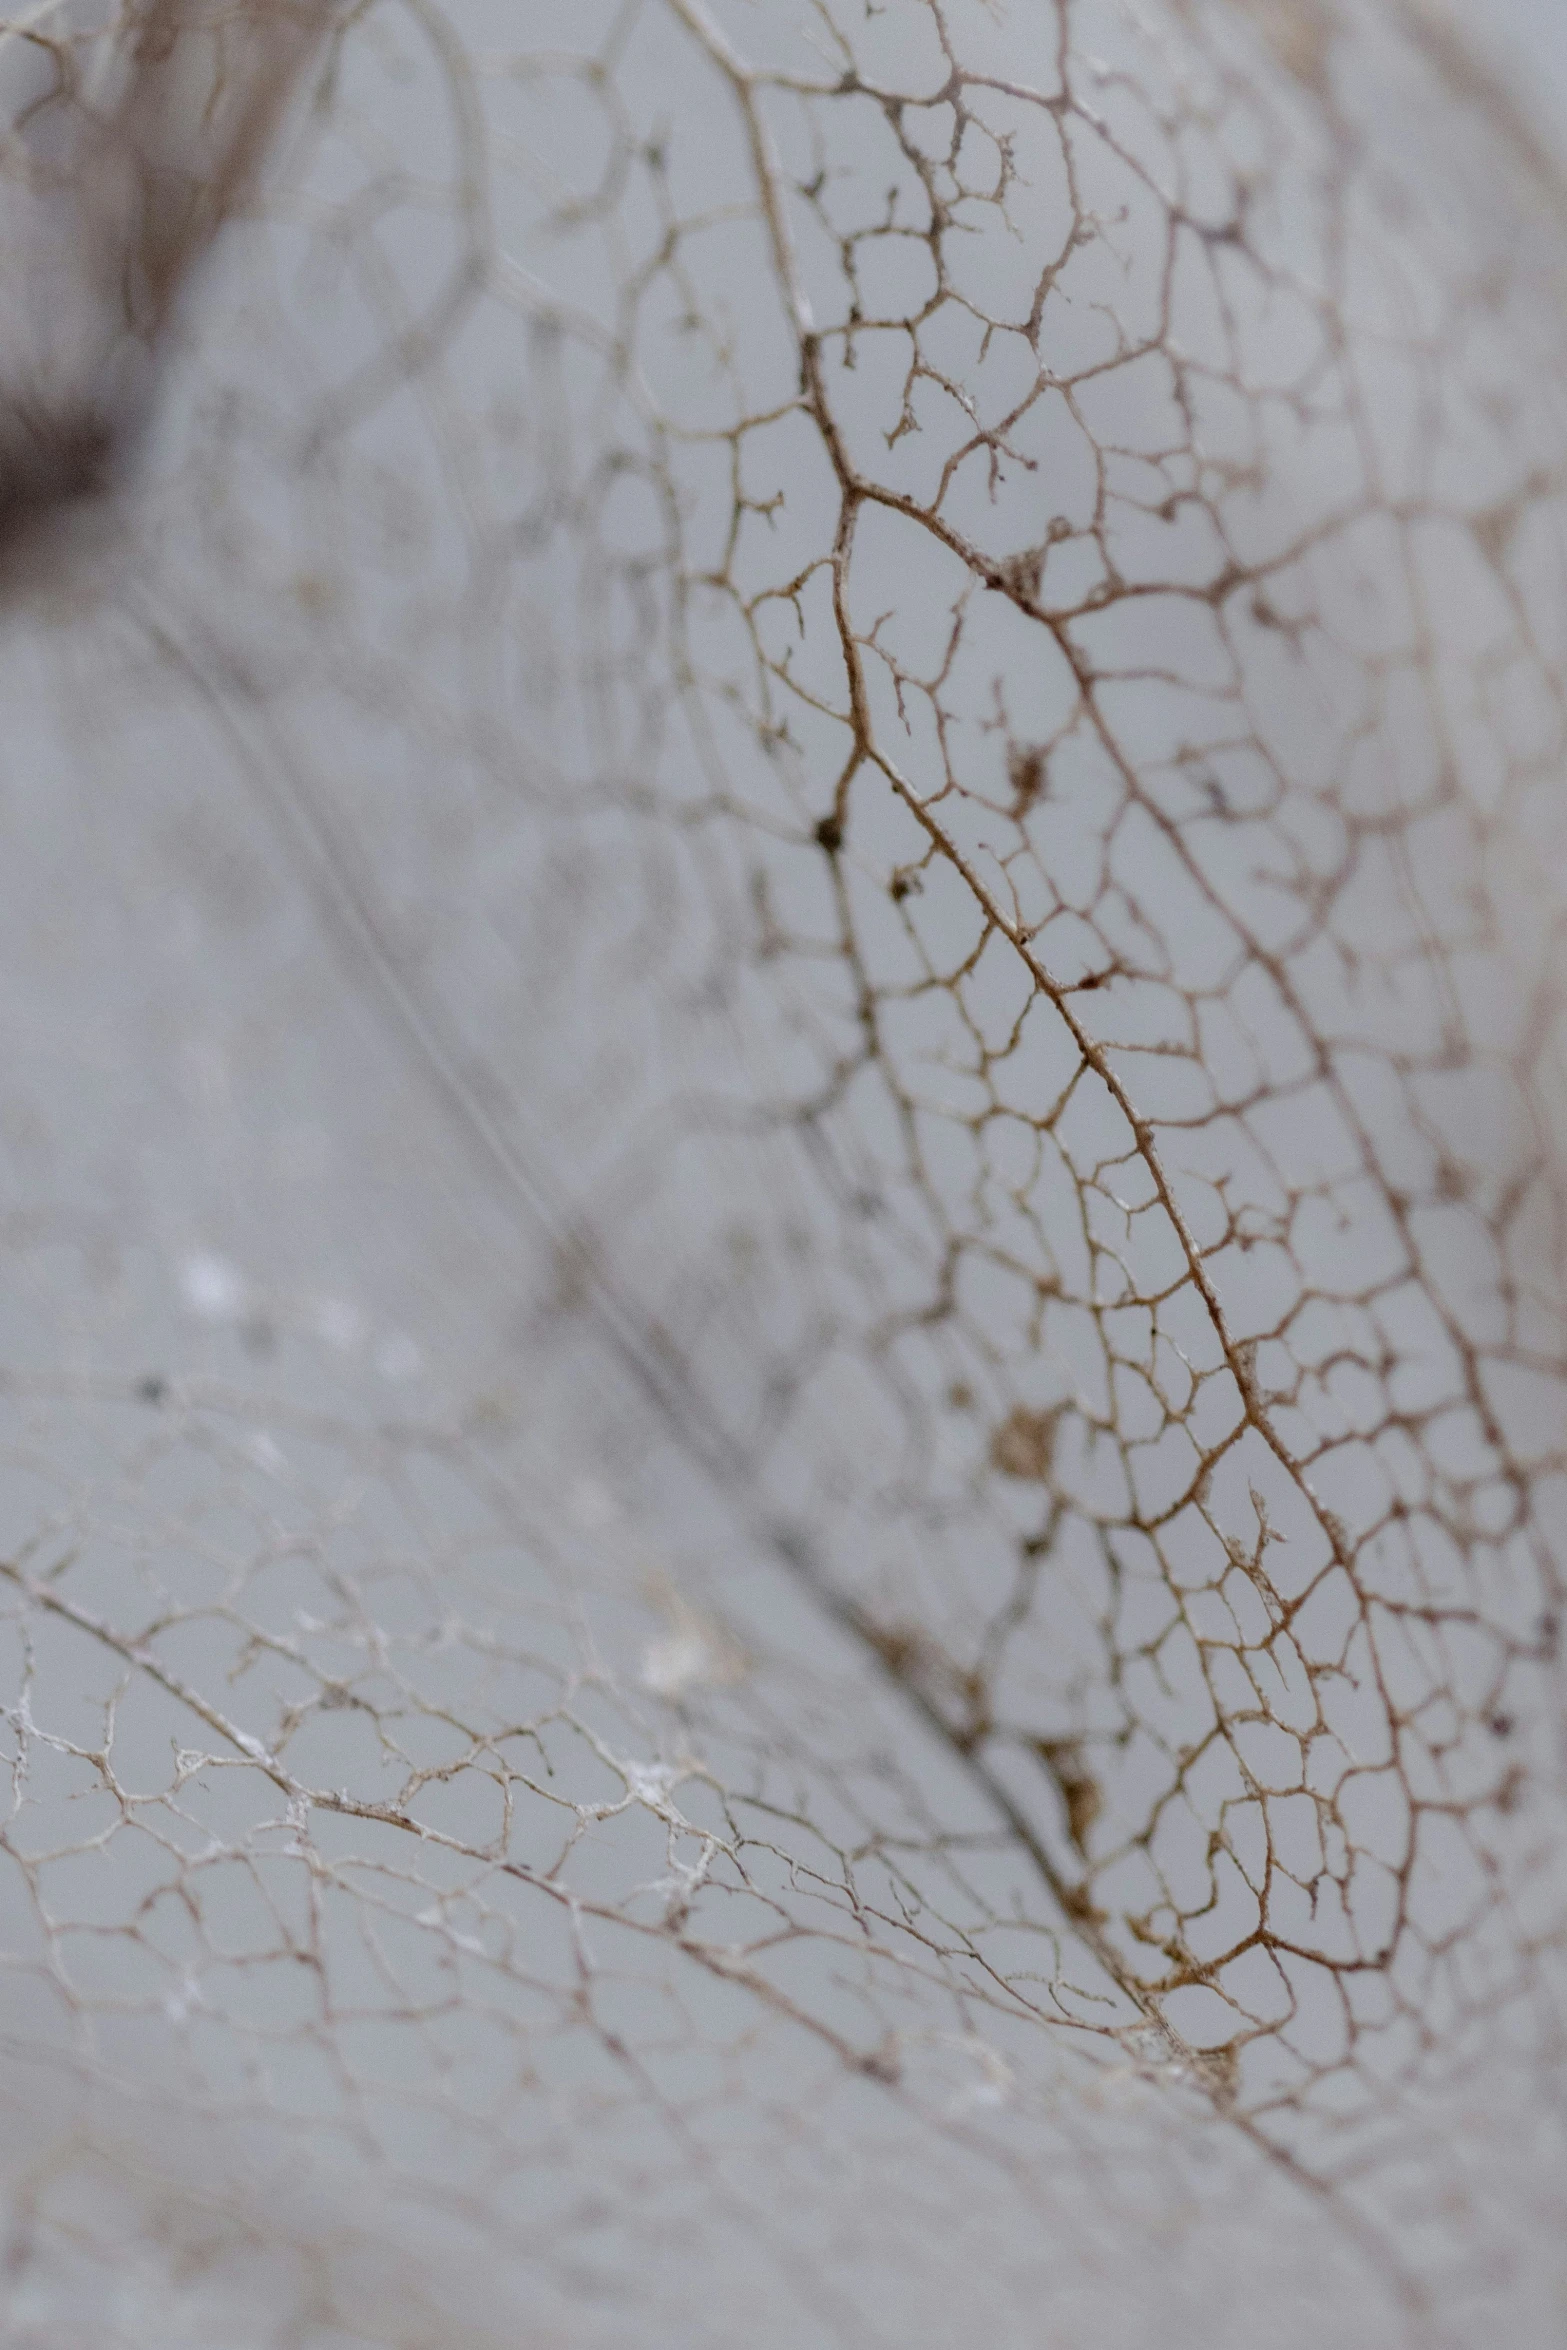 an extreme closeup view of the dried plant stem